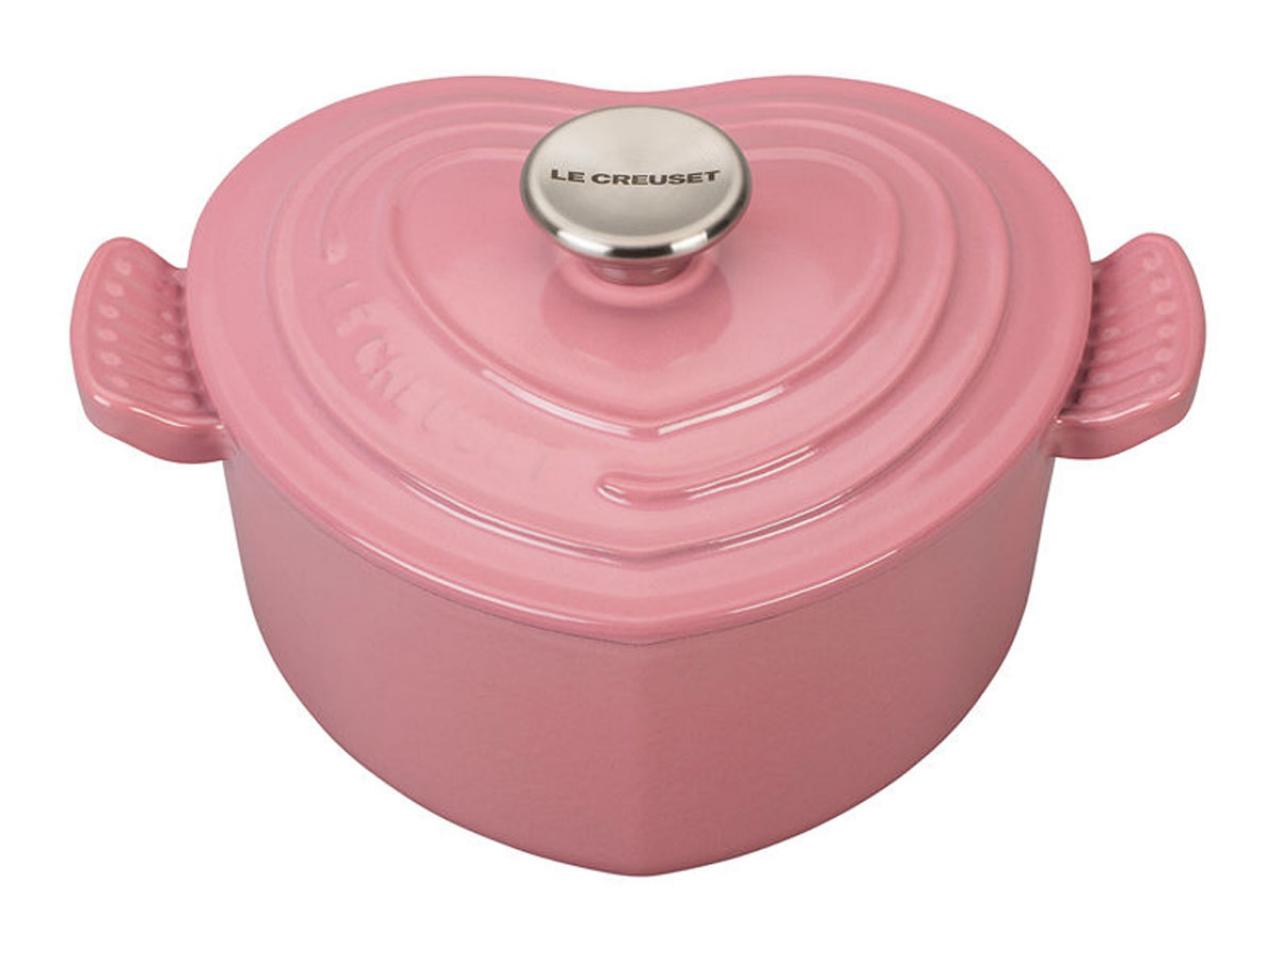 Why I Want the Le Creuset Heart Cocotte, FN Dish - Behind-the-Scenes, Food  Trends, and Best Recipes : Food Network